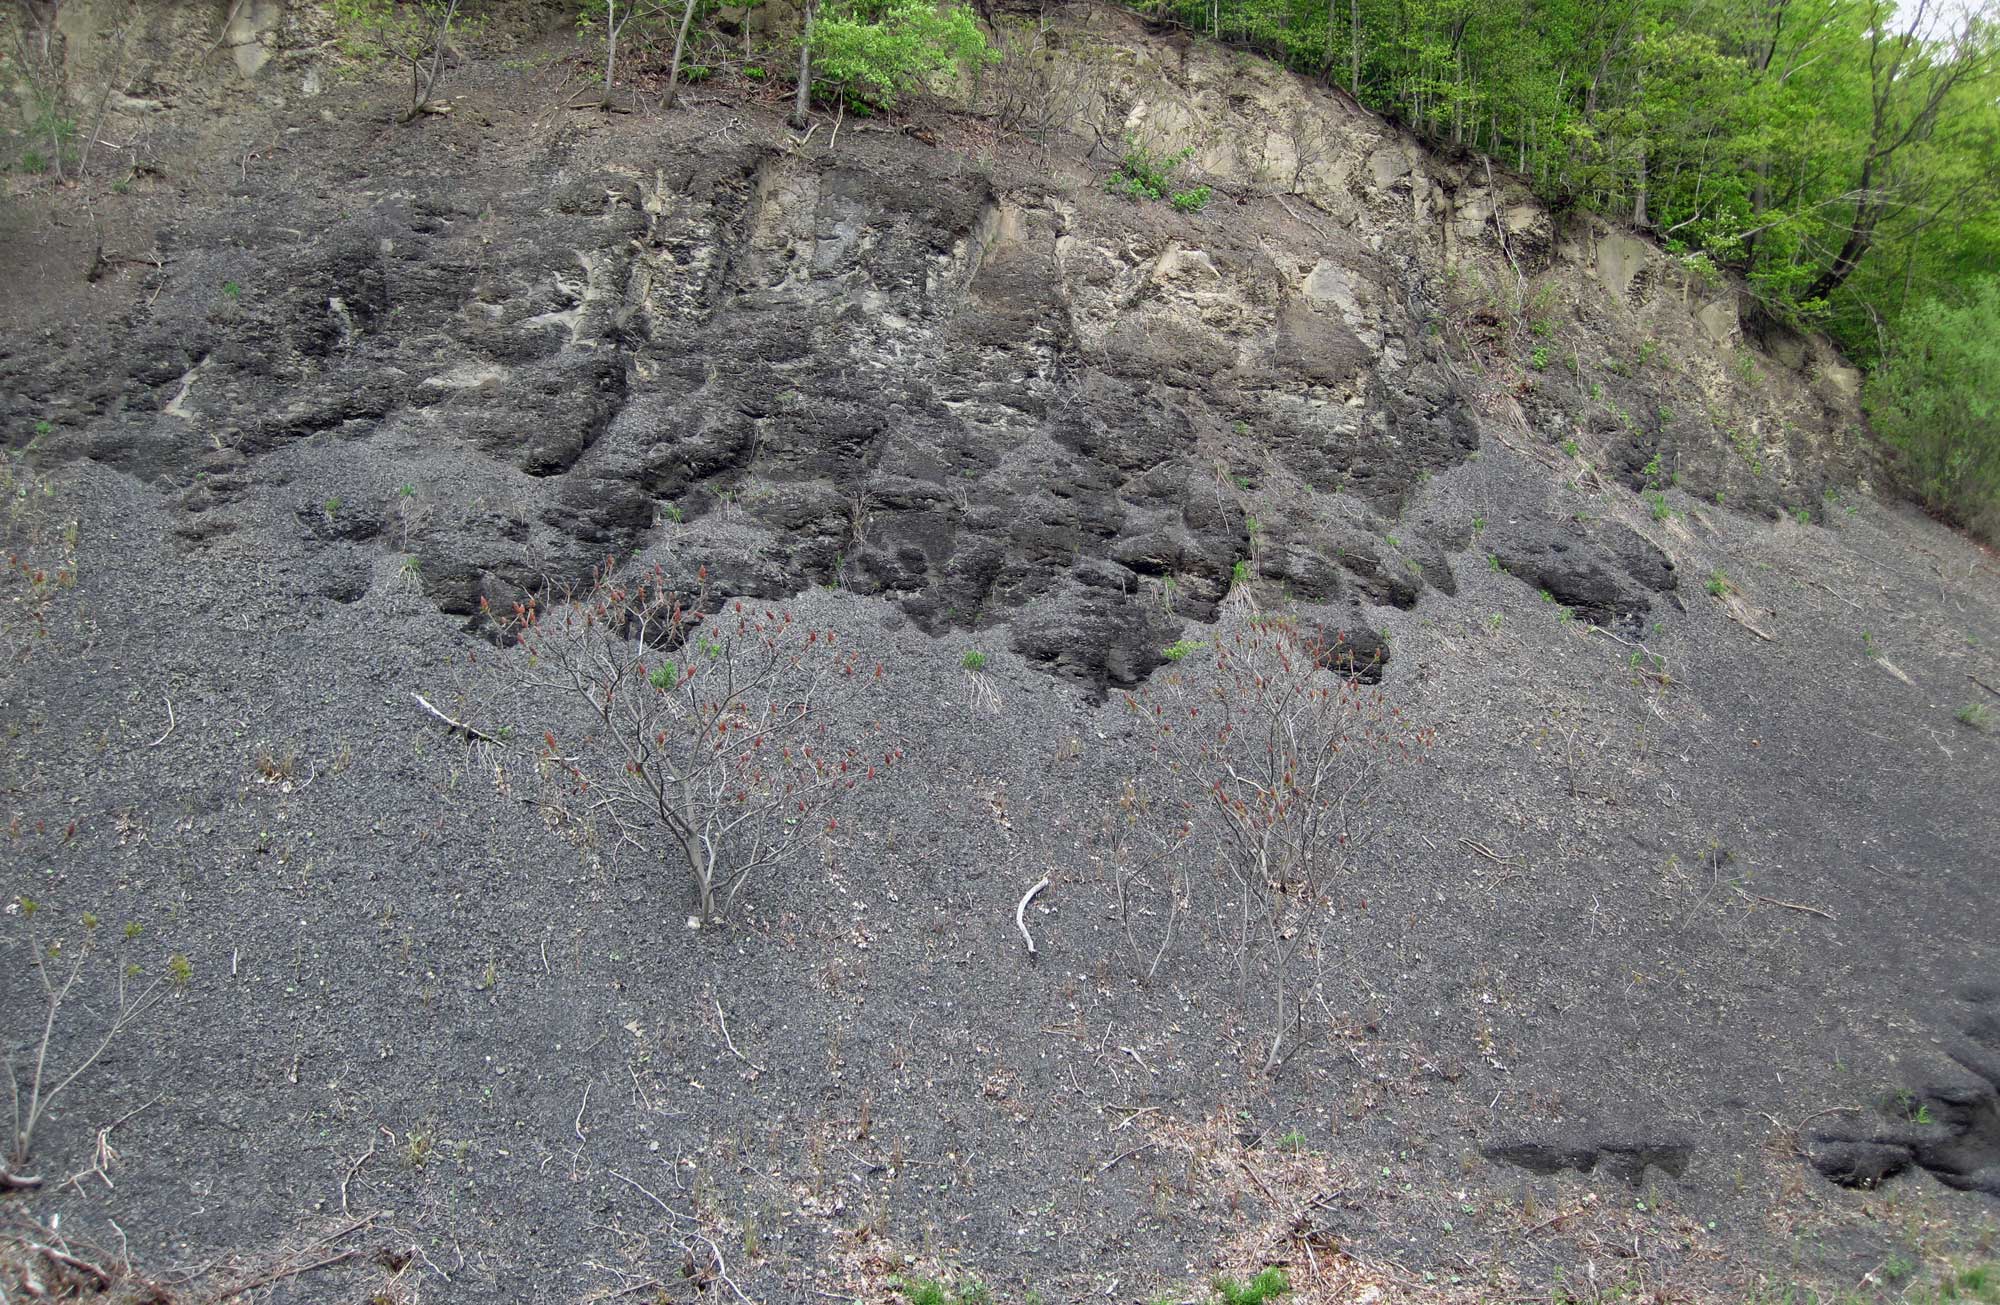 Photograph of an exposure of dark-colored (gray to black) Devonian shale in New York.